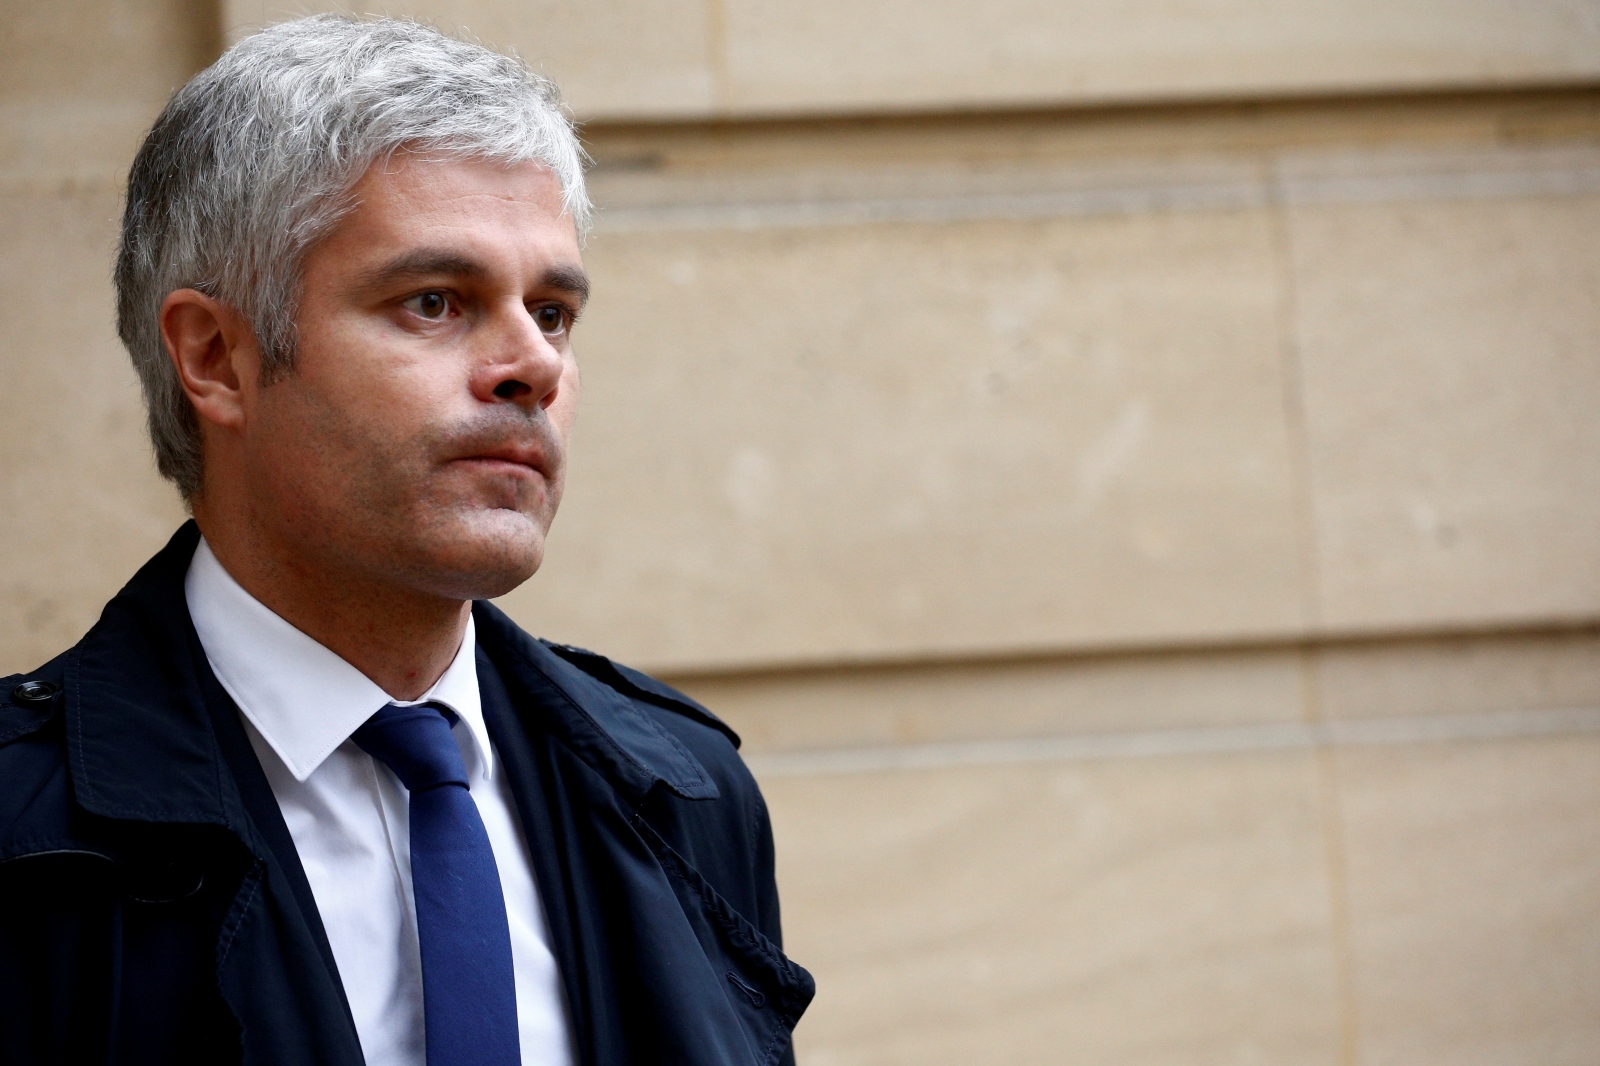 FILE PHOTO: French conservative party Les Republicains leader Laurent Wauquiez leaves after a meeting at the Hotel Matignon in Paris FILE PHOTO: French conservative party Les Republicains (LR or The Republicans) leader Laurent Wauquiez leaves after a meeting with French Prime Minister as the "yellow vest" nationwide protests continue, at the Hotel Matignon in Paris, France, December 3, 2018. REUTERS/Stephane Mahe/File Photo Stephane Mahe